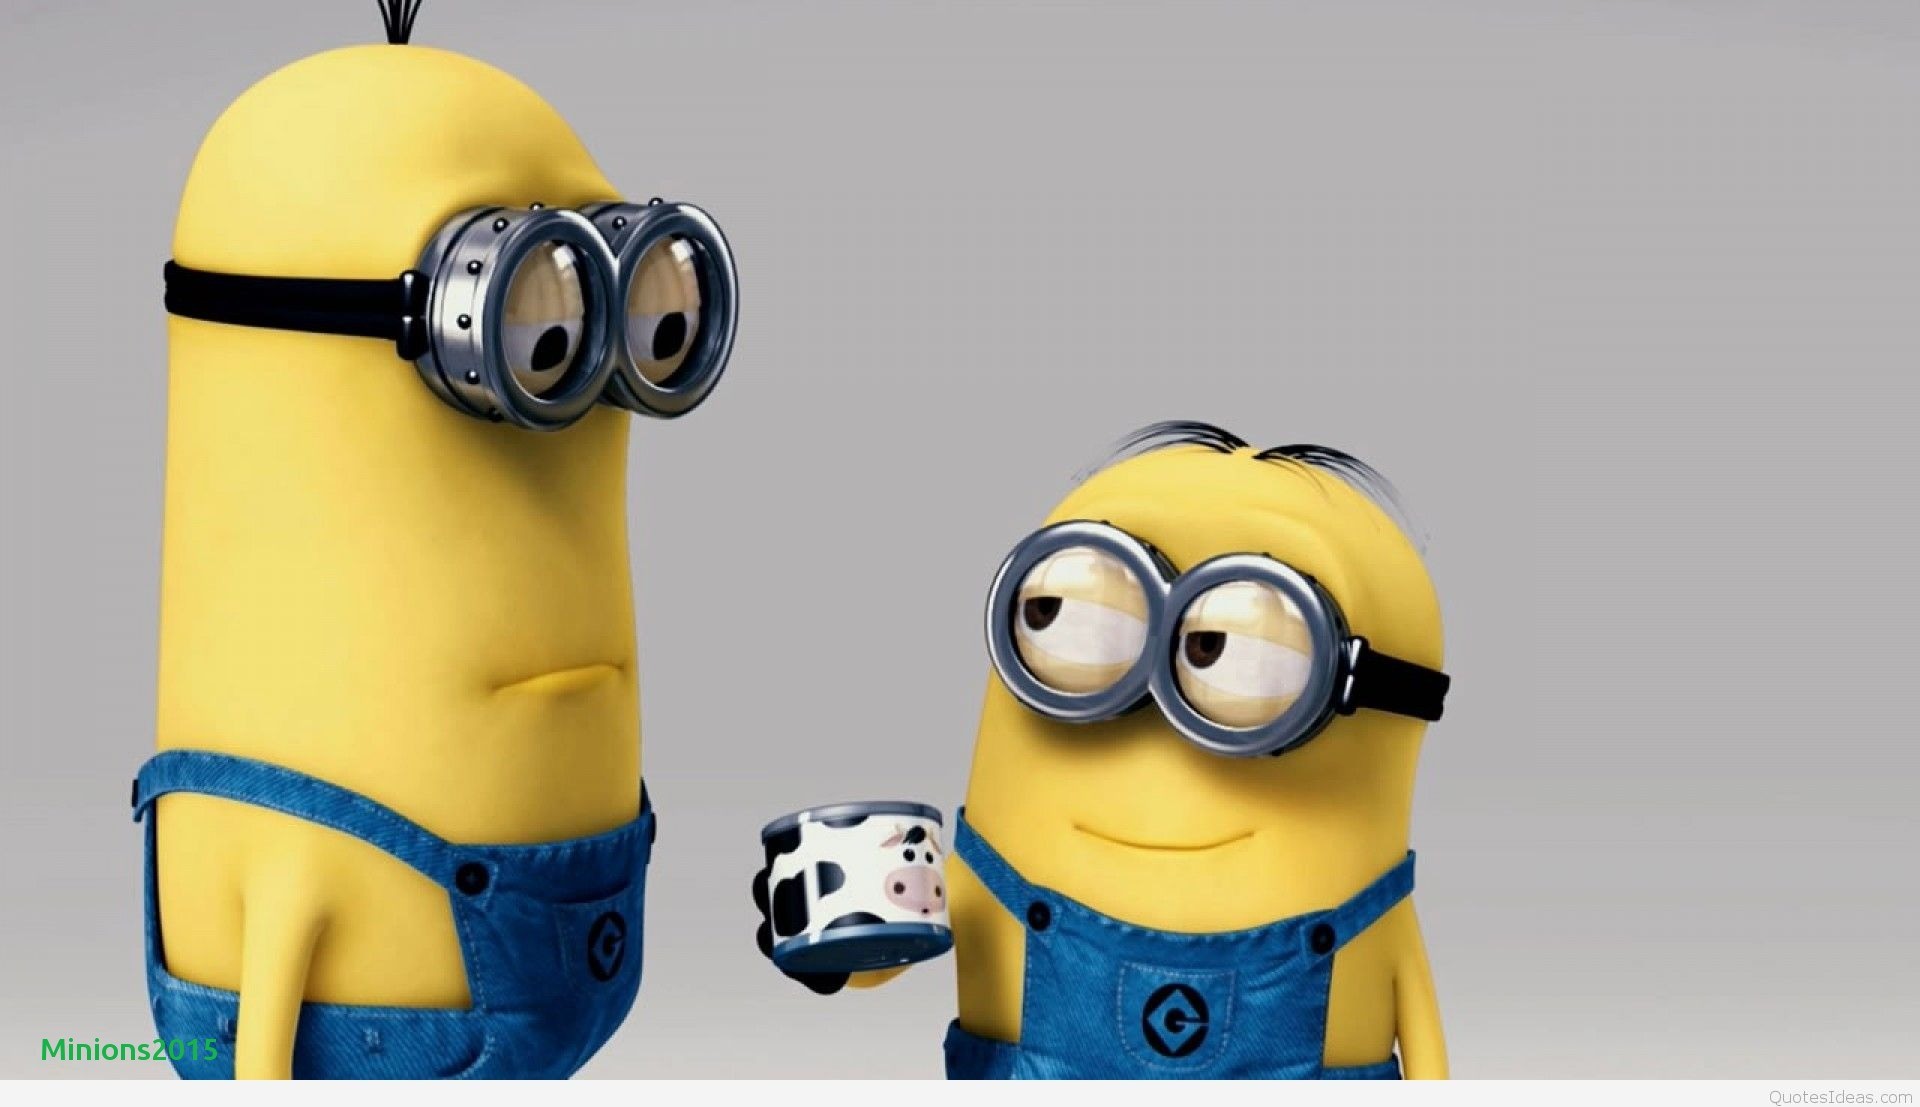 1920x1107 Best-funny-minions-wallpapers-and-backgrounds-hd New Funny top